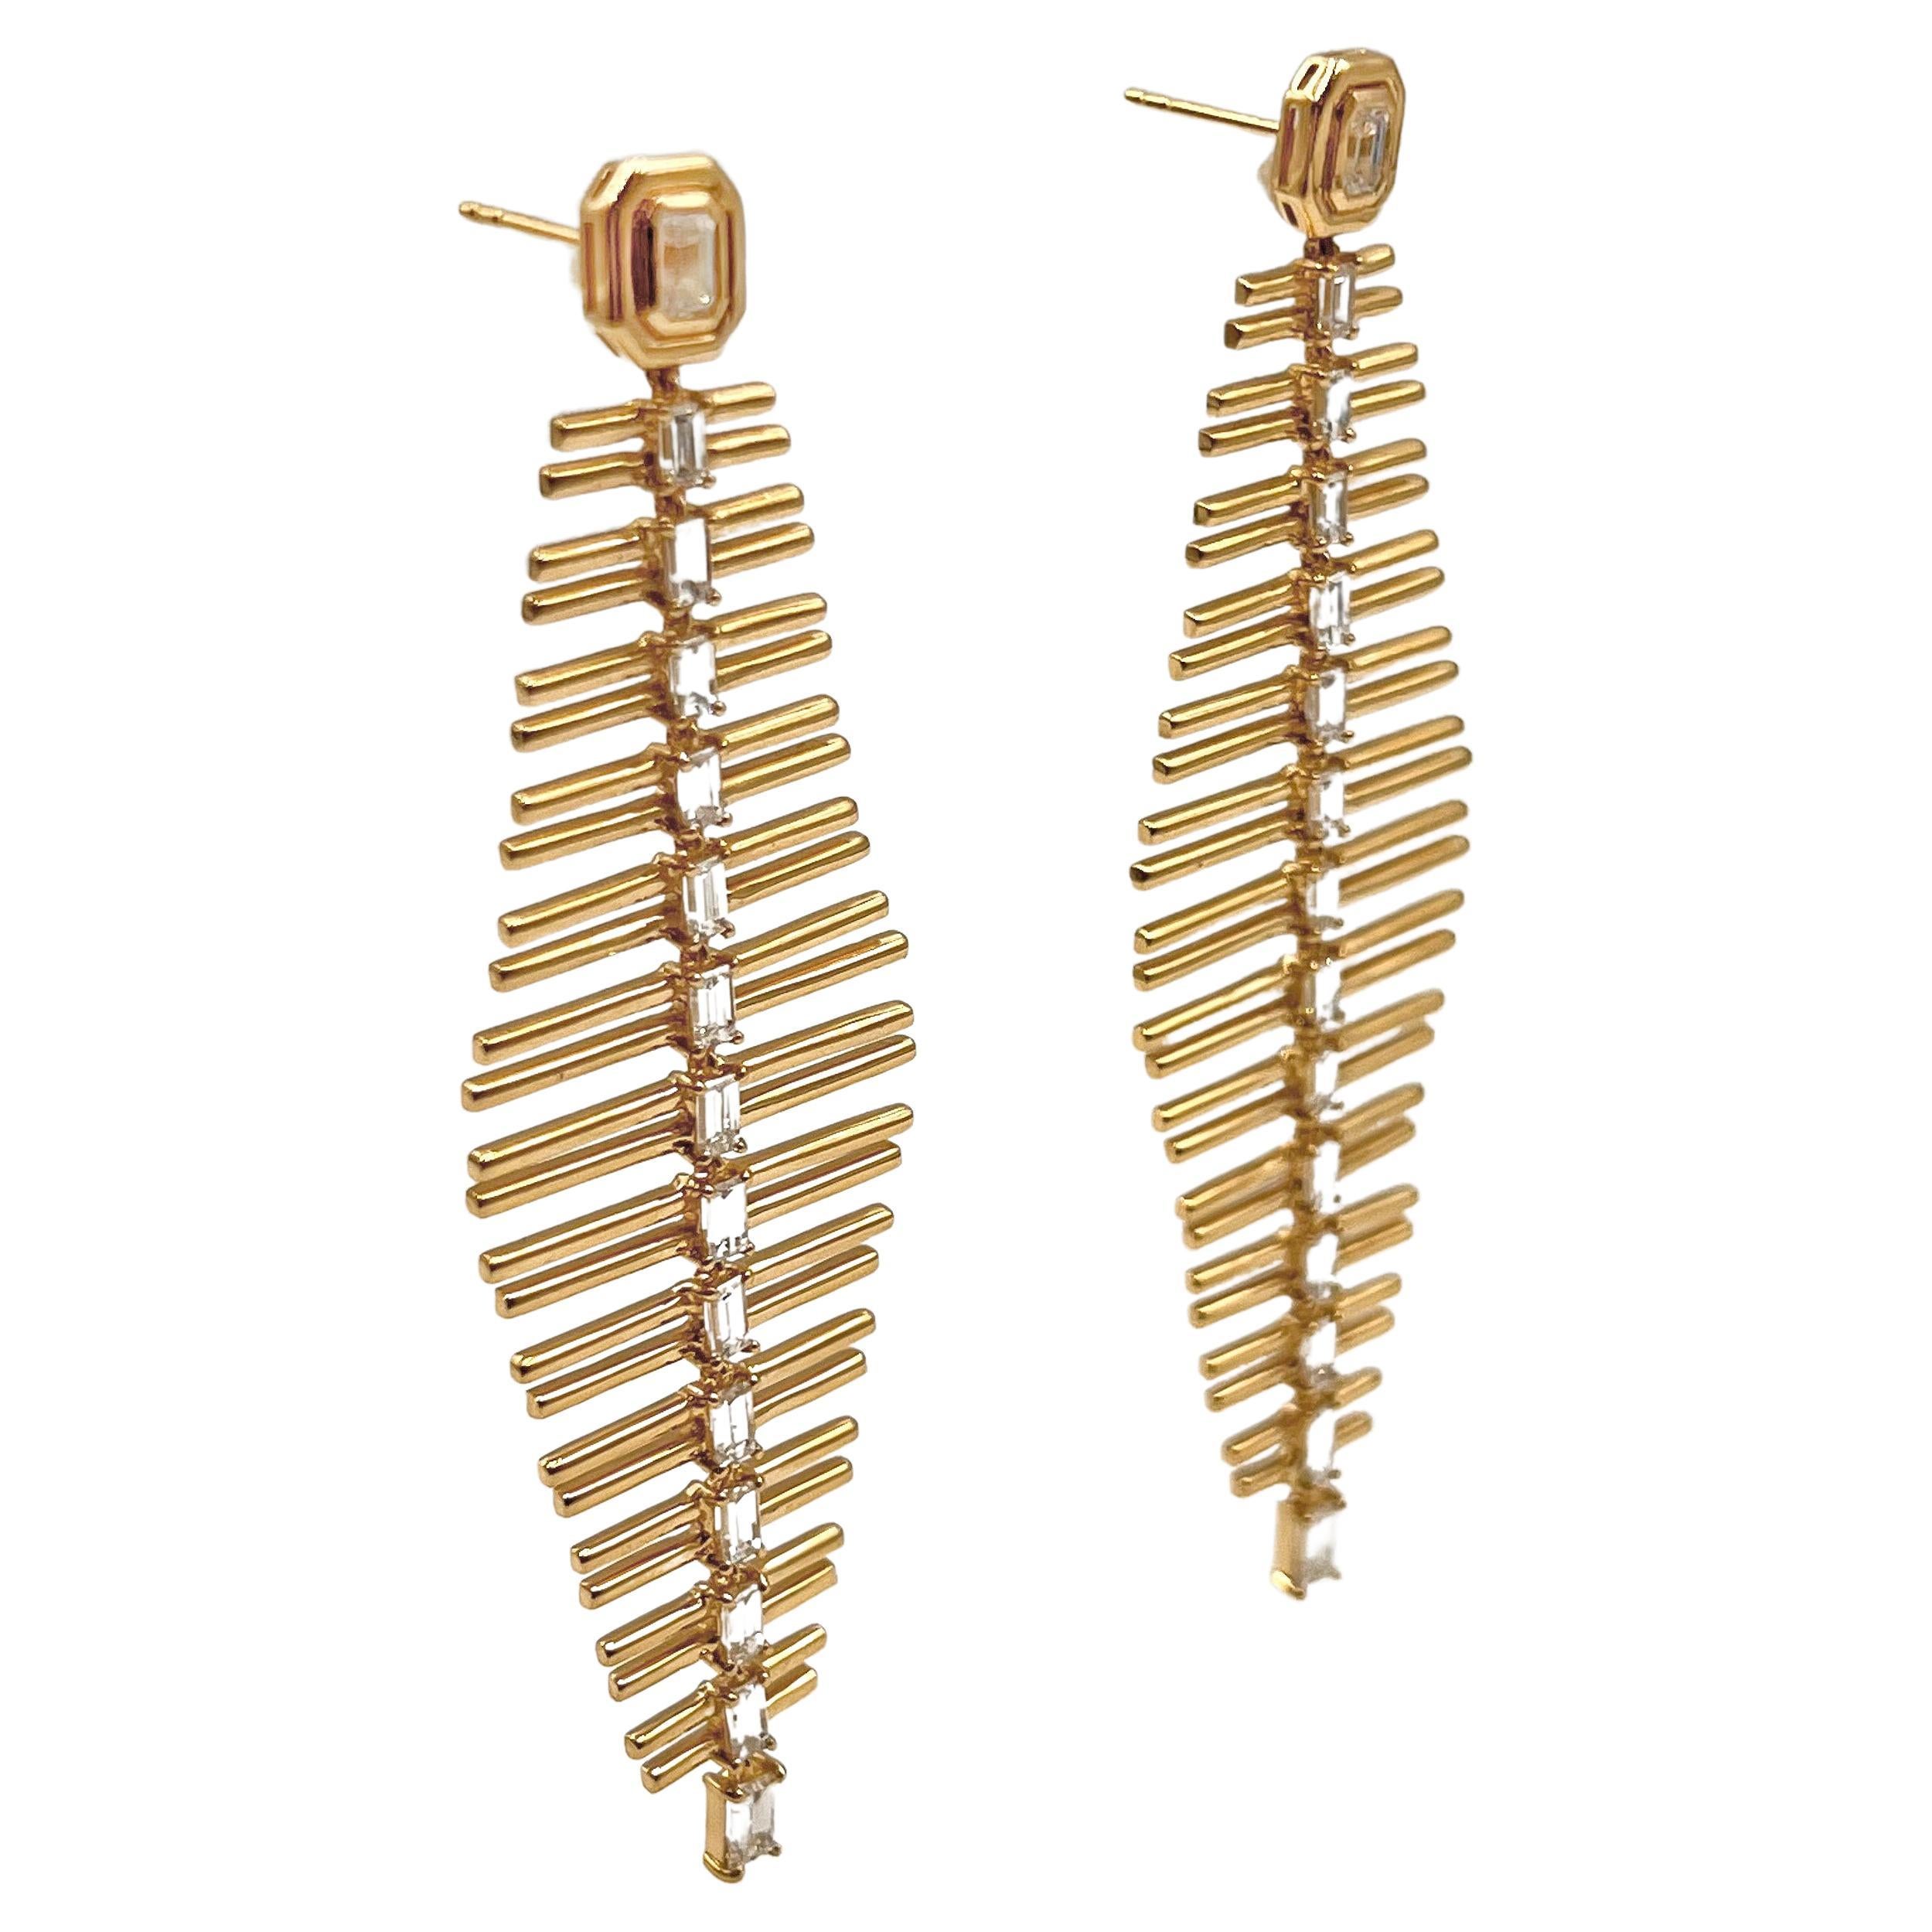 Stylized fishbone long drop earrings in polished 18k yellow gold.  Tops are each bezel-set with an emerald-cut diamond with an additional fourteen baguette-cut diamonds running down the center of either earring. Thirty diamonds weighing 3.68 total